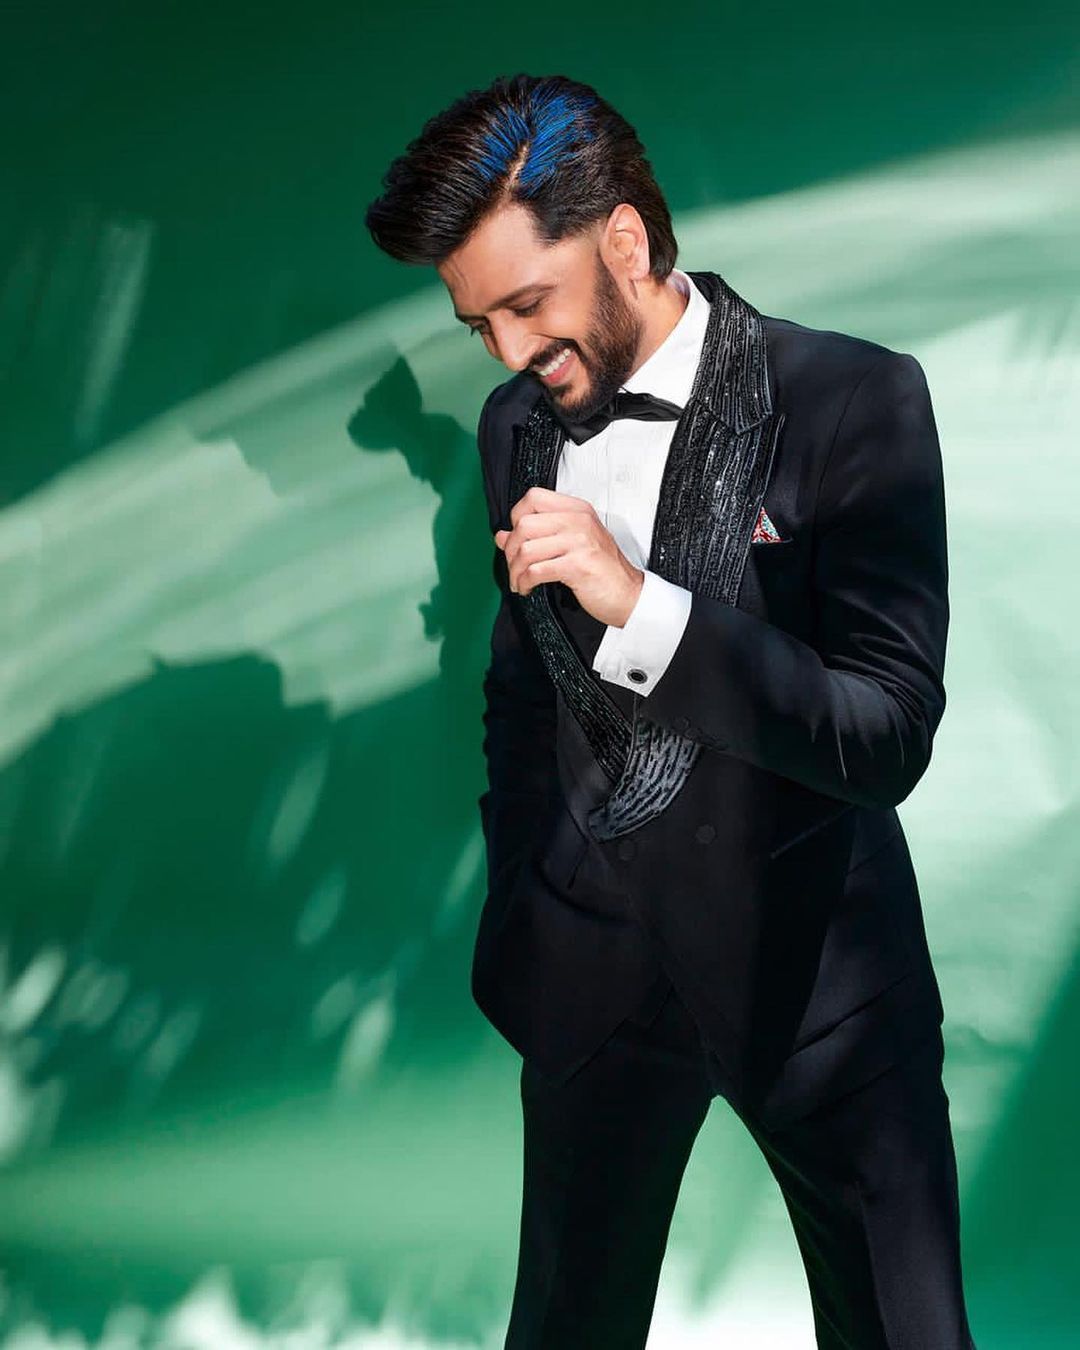 Riteish Deshmukh Delivers The Perfect Speech For ‘Not’ Being Nominated For Best Actor Award At Filmfare